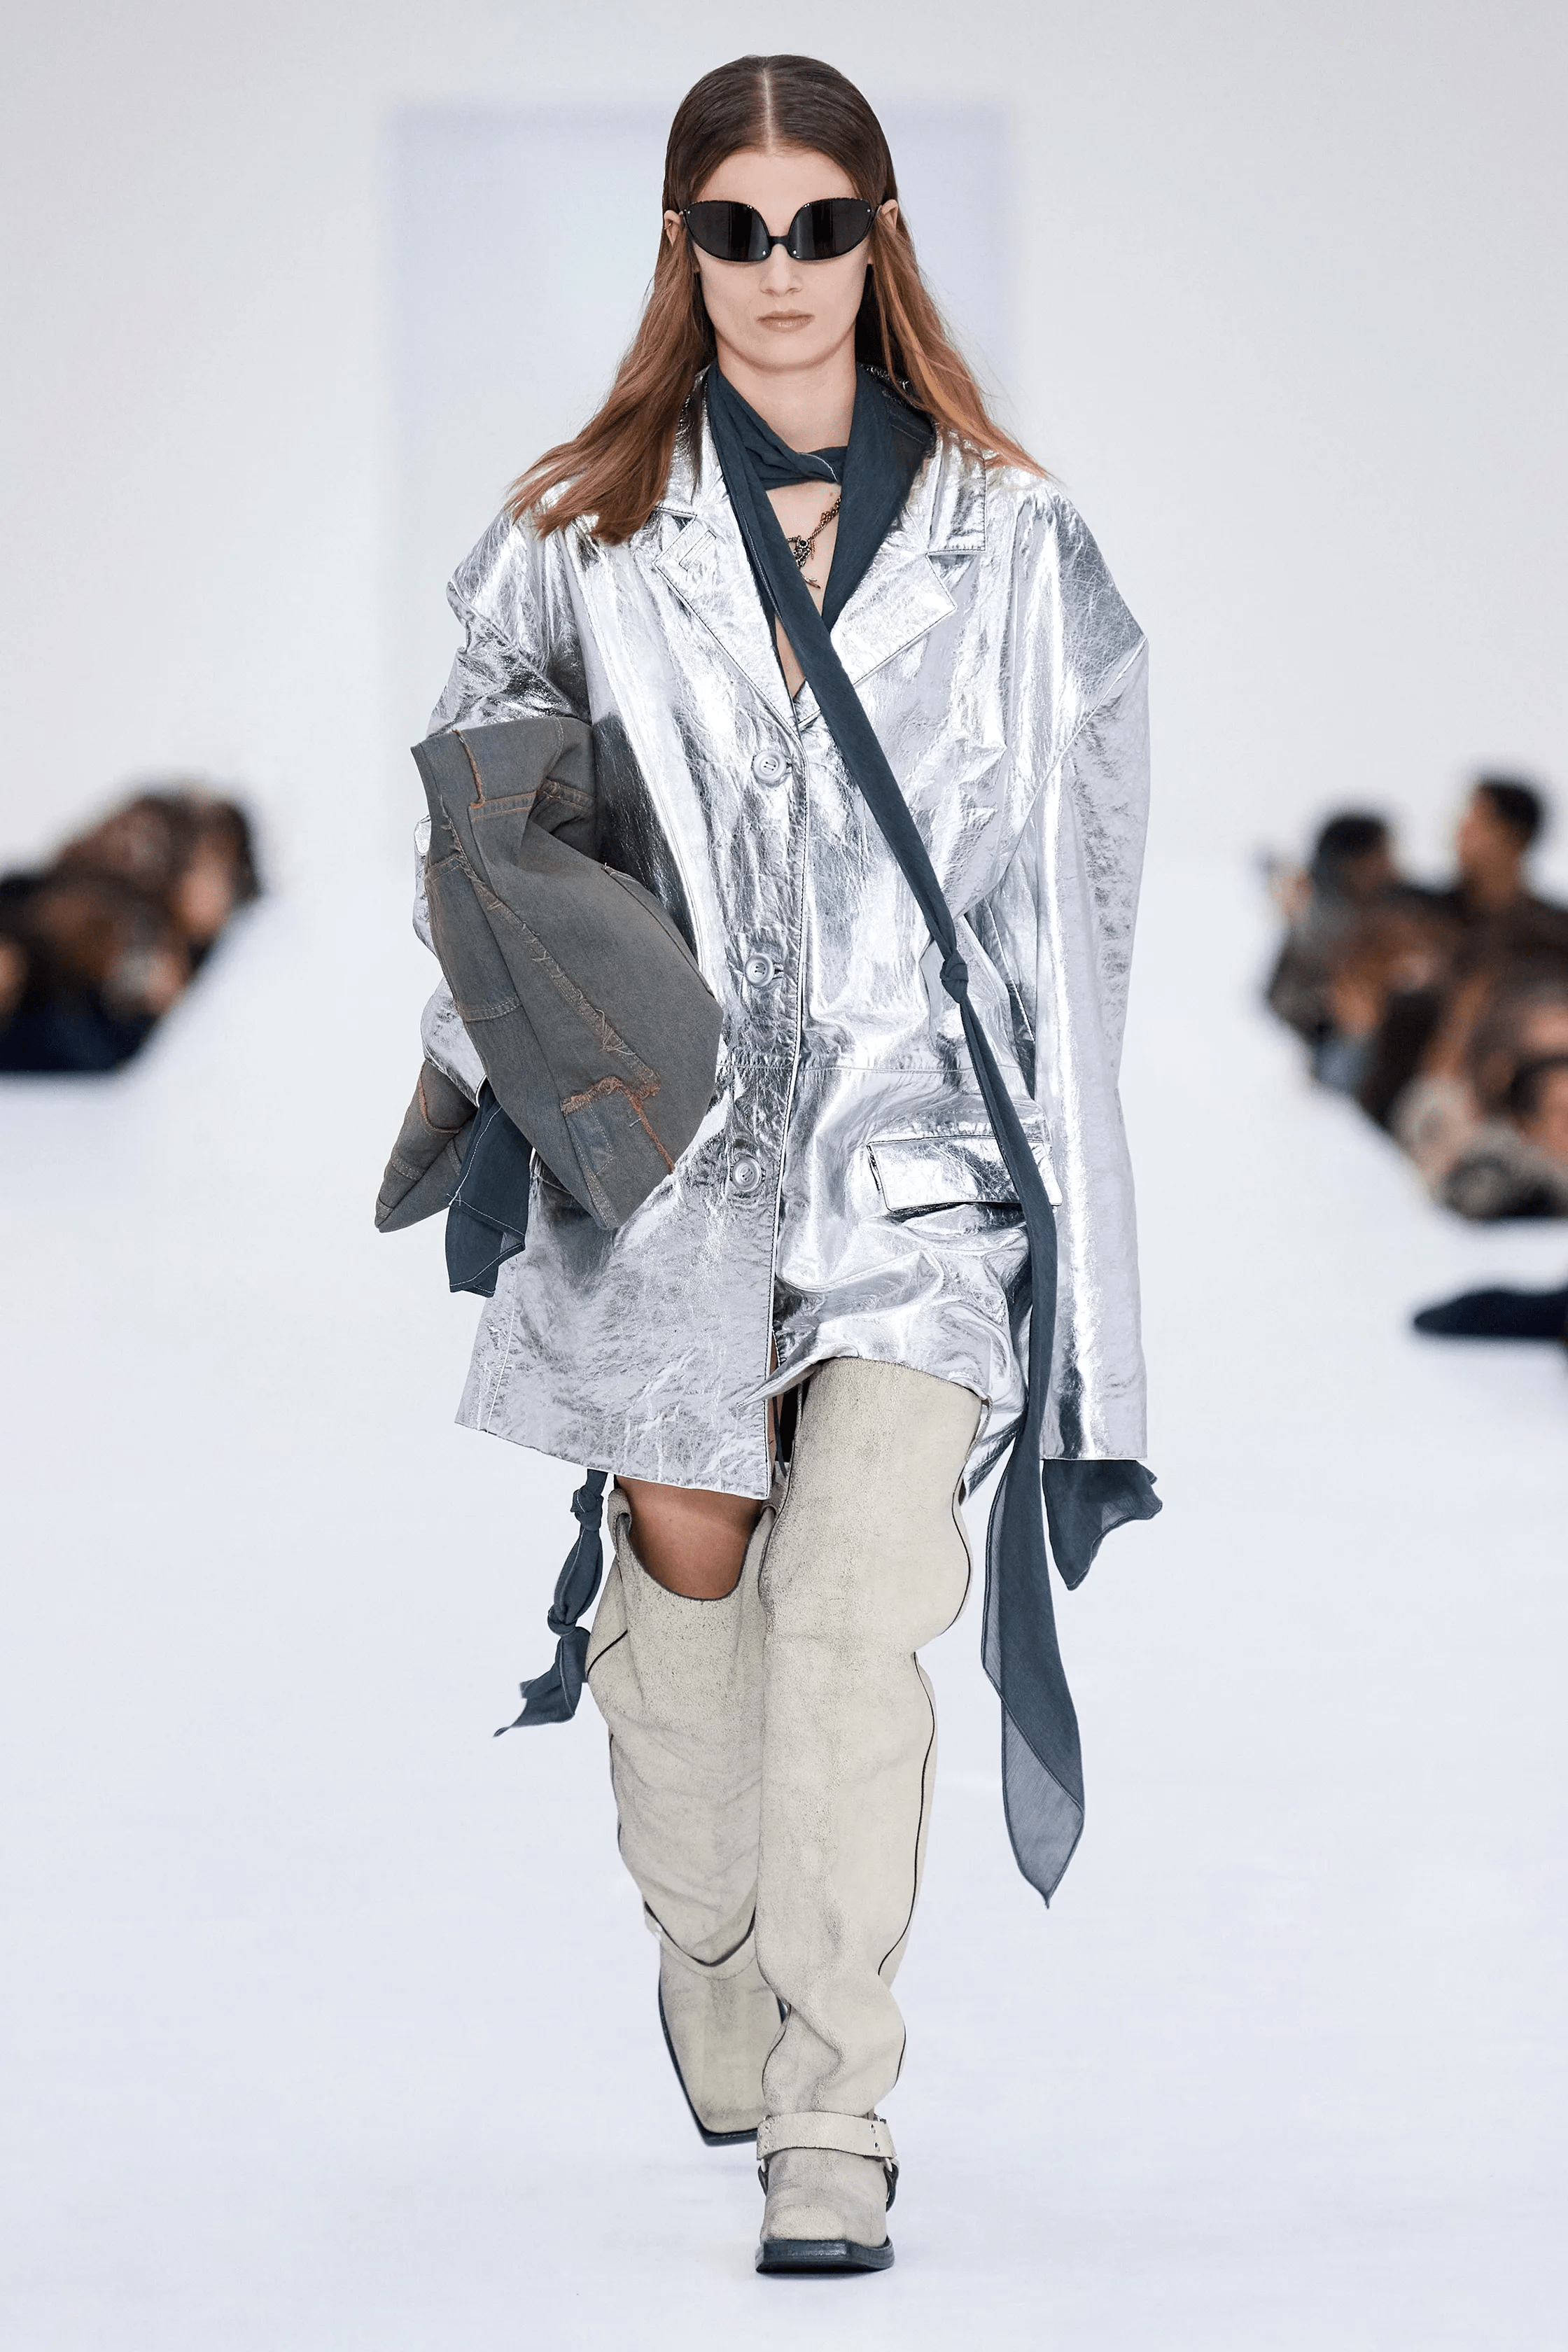 00003-acne-studios-fall-2022-ready-to-wear-paris-credit-isidore-montag-gorunway.png